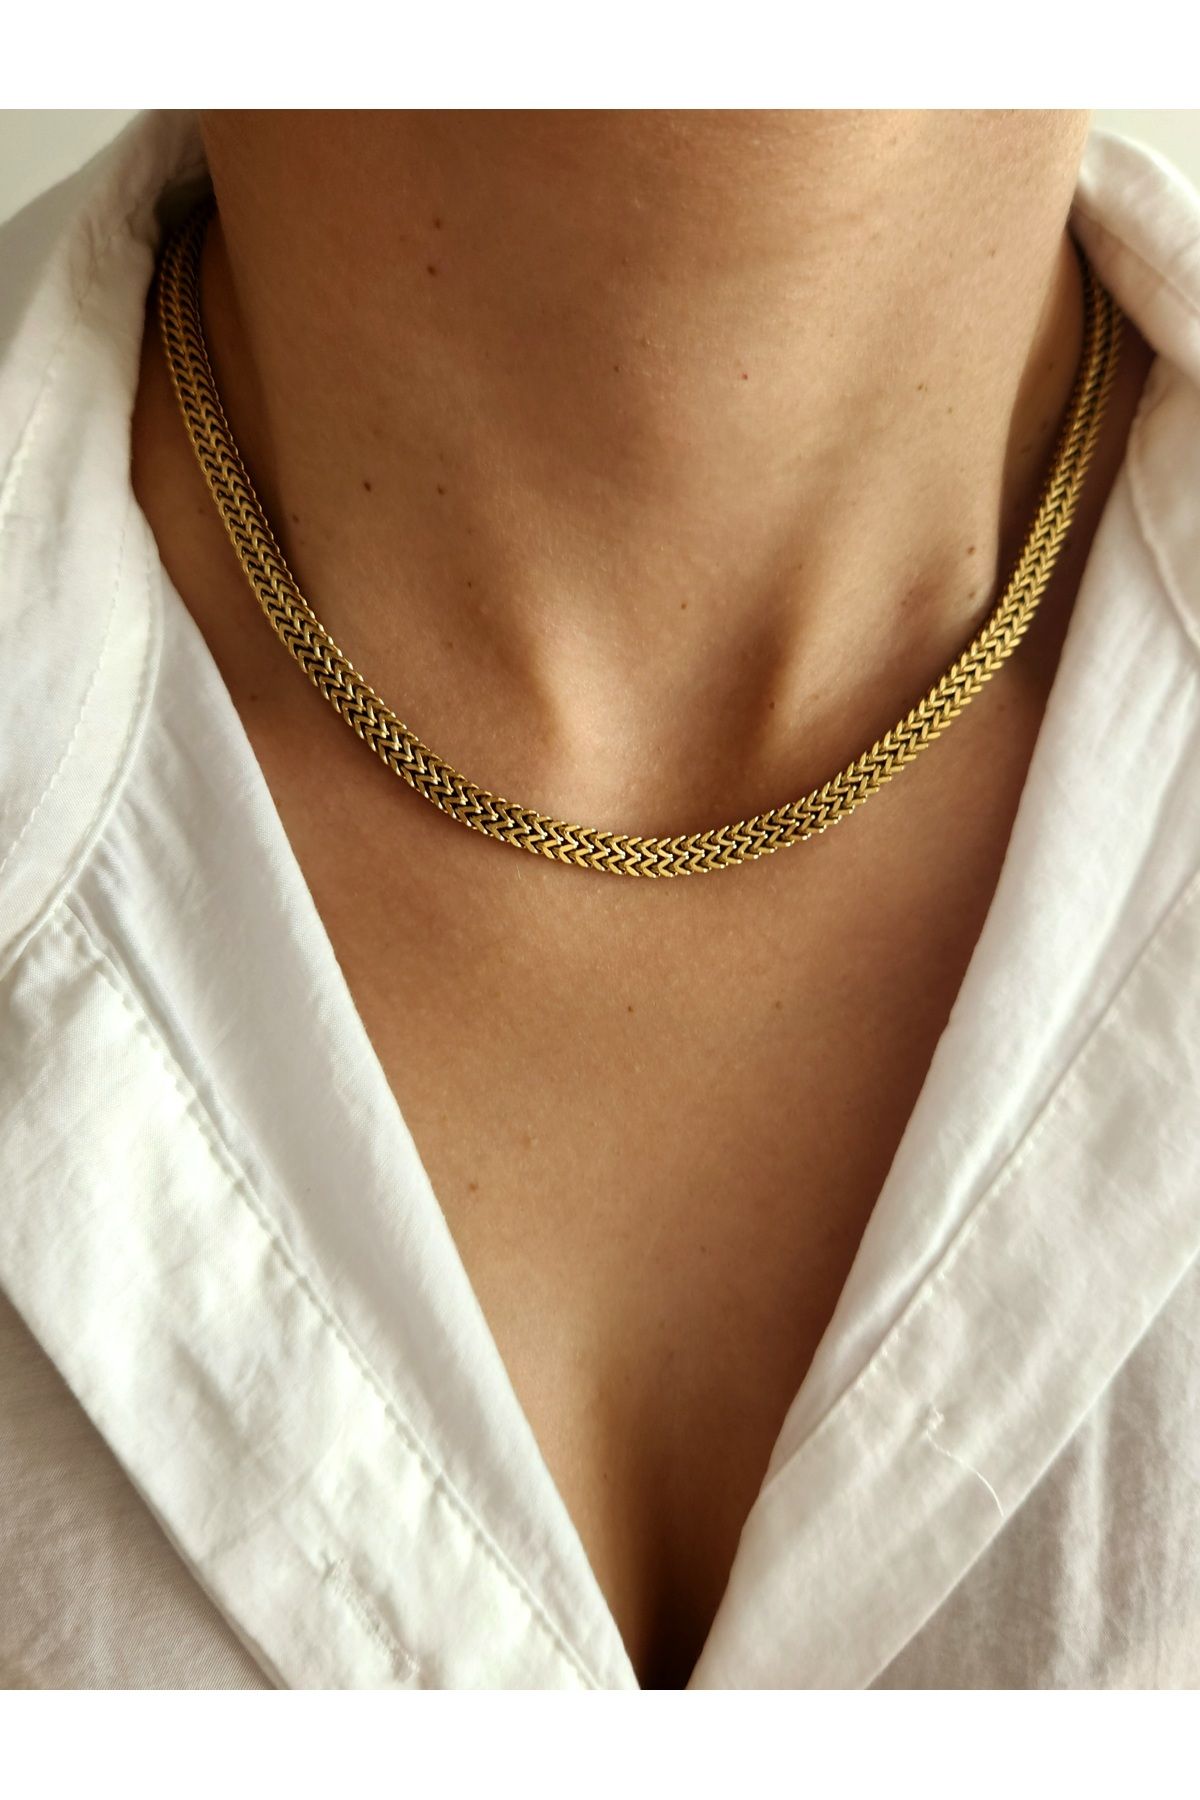 Necklace in 18 K gold snake chain Gross weight : 12.2 g… | Drouot.com